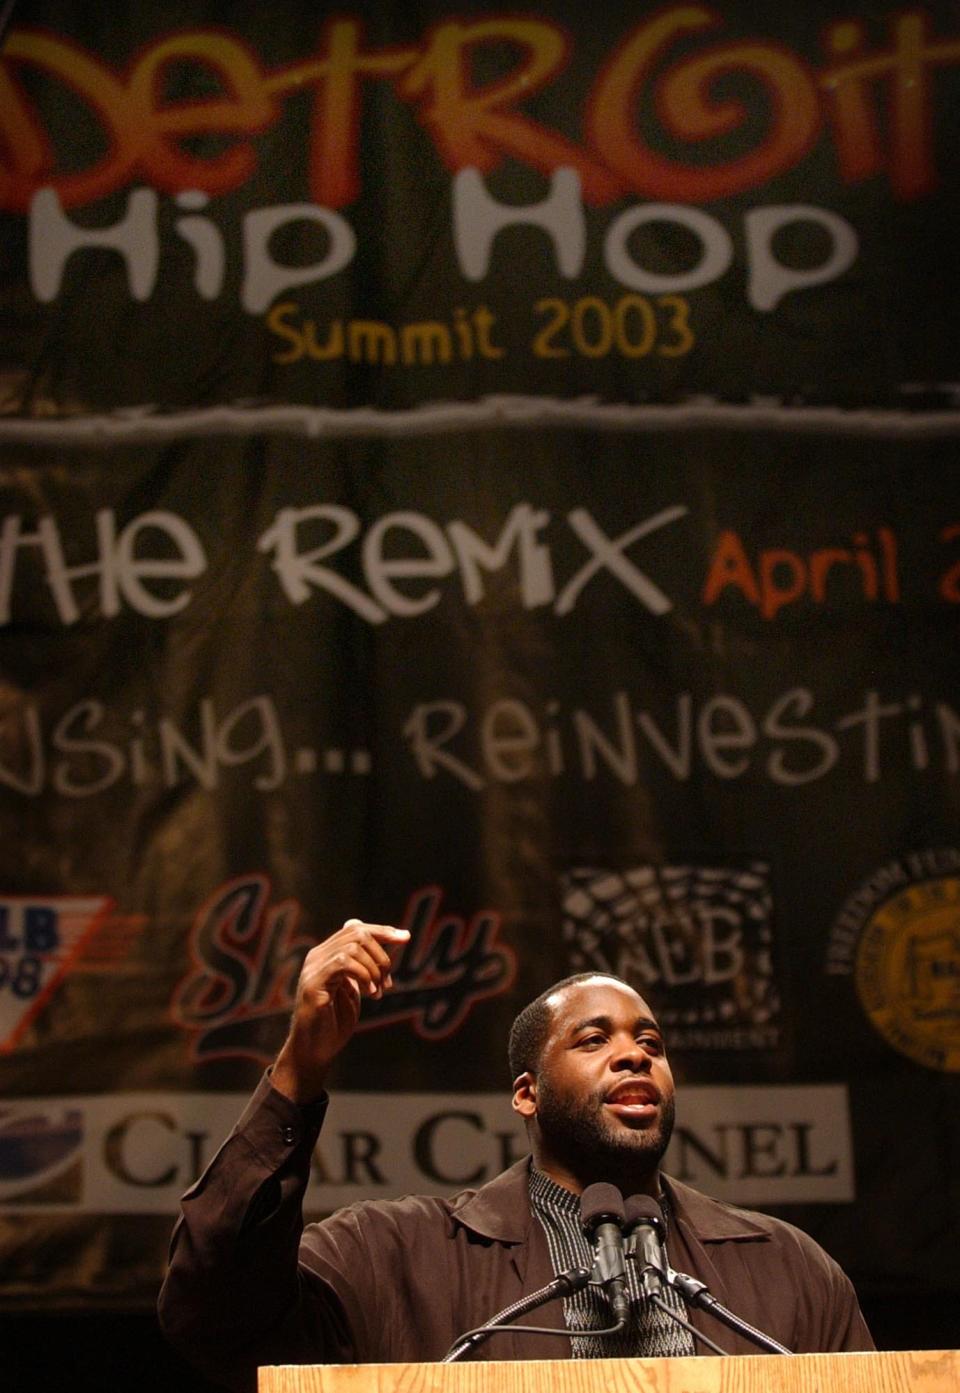 Hip-hop mogul Russell Simmons held the Detroit Hip-Hop Summit at Cobo Arena on April 26, 2003. Simmons dubbed Detroit Mayor Kwame Kilpatrick "the Hip-Hop Mayor," a nickname that did him no favors.